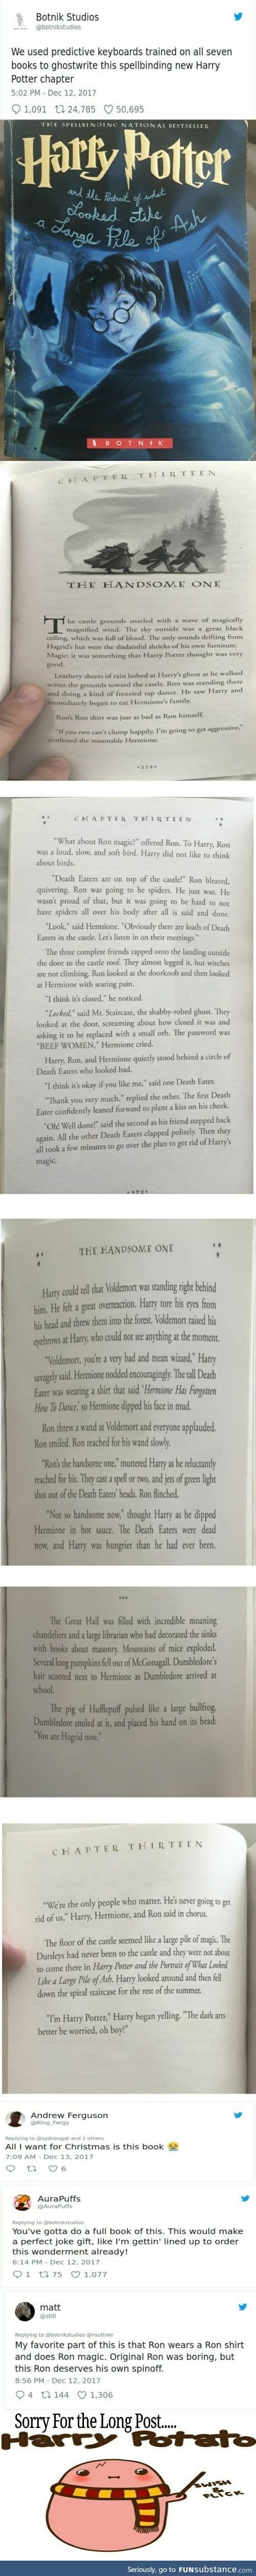 Not mine-saw it on 9gag : an AI that has read all the Harry Potter books writes a chapter.